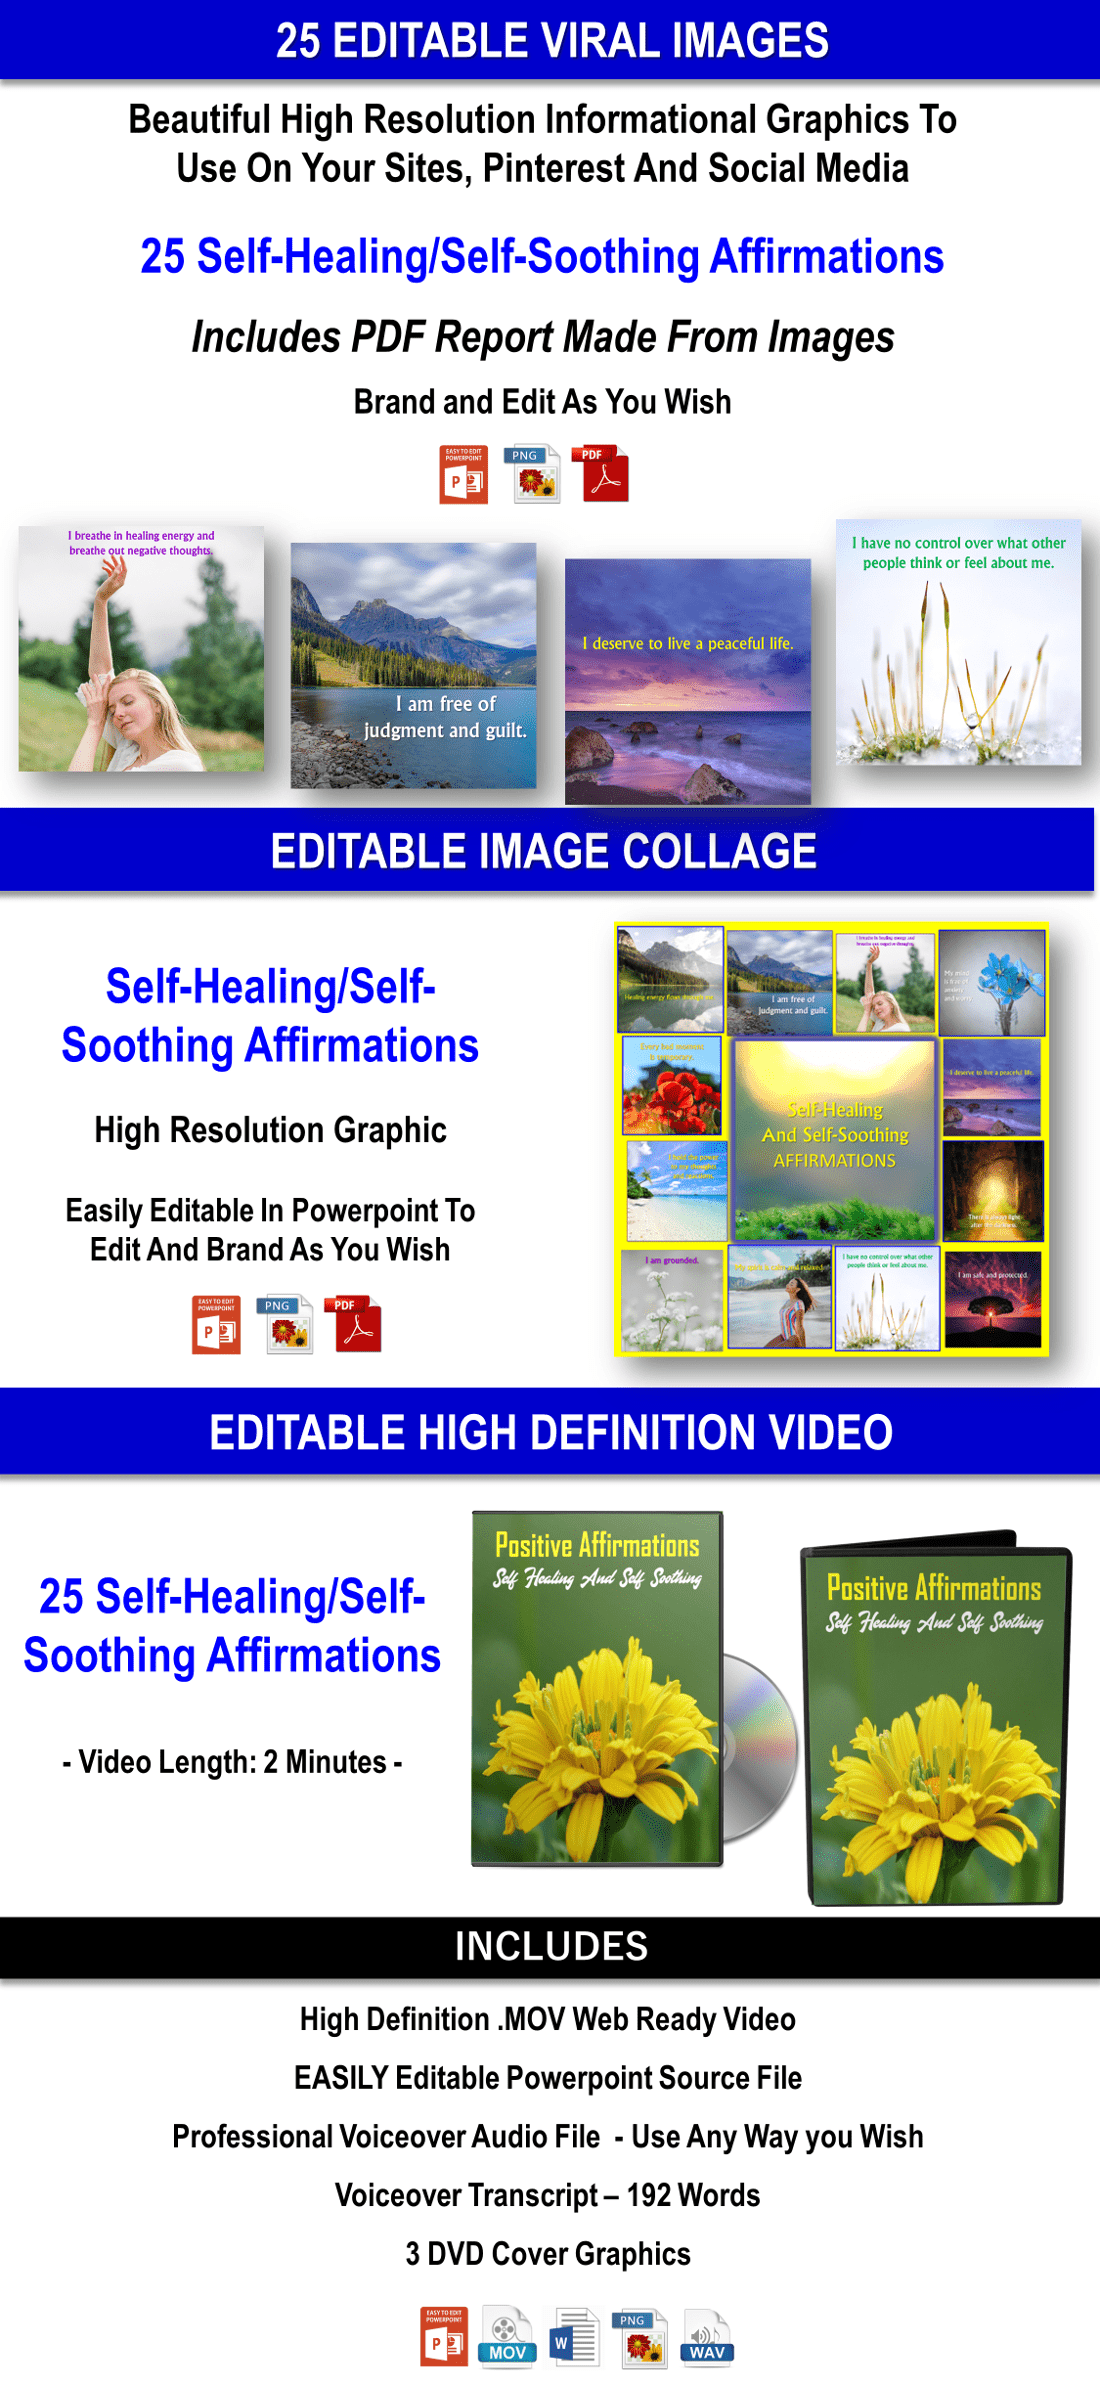 101 Healing Practices/Rituals: Heal Inner-Self, Mind & Spirit Content Pack With PLR Rights